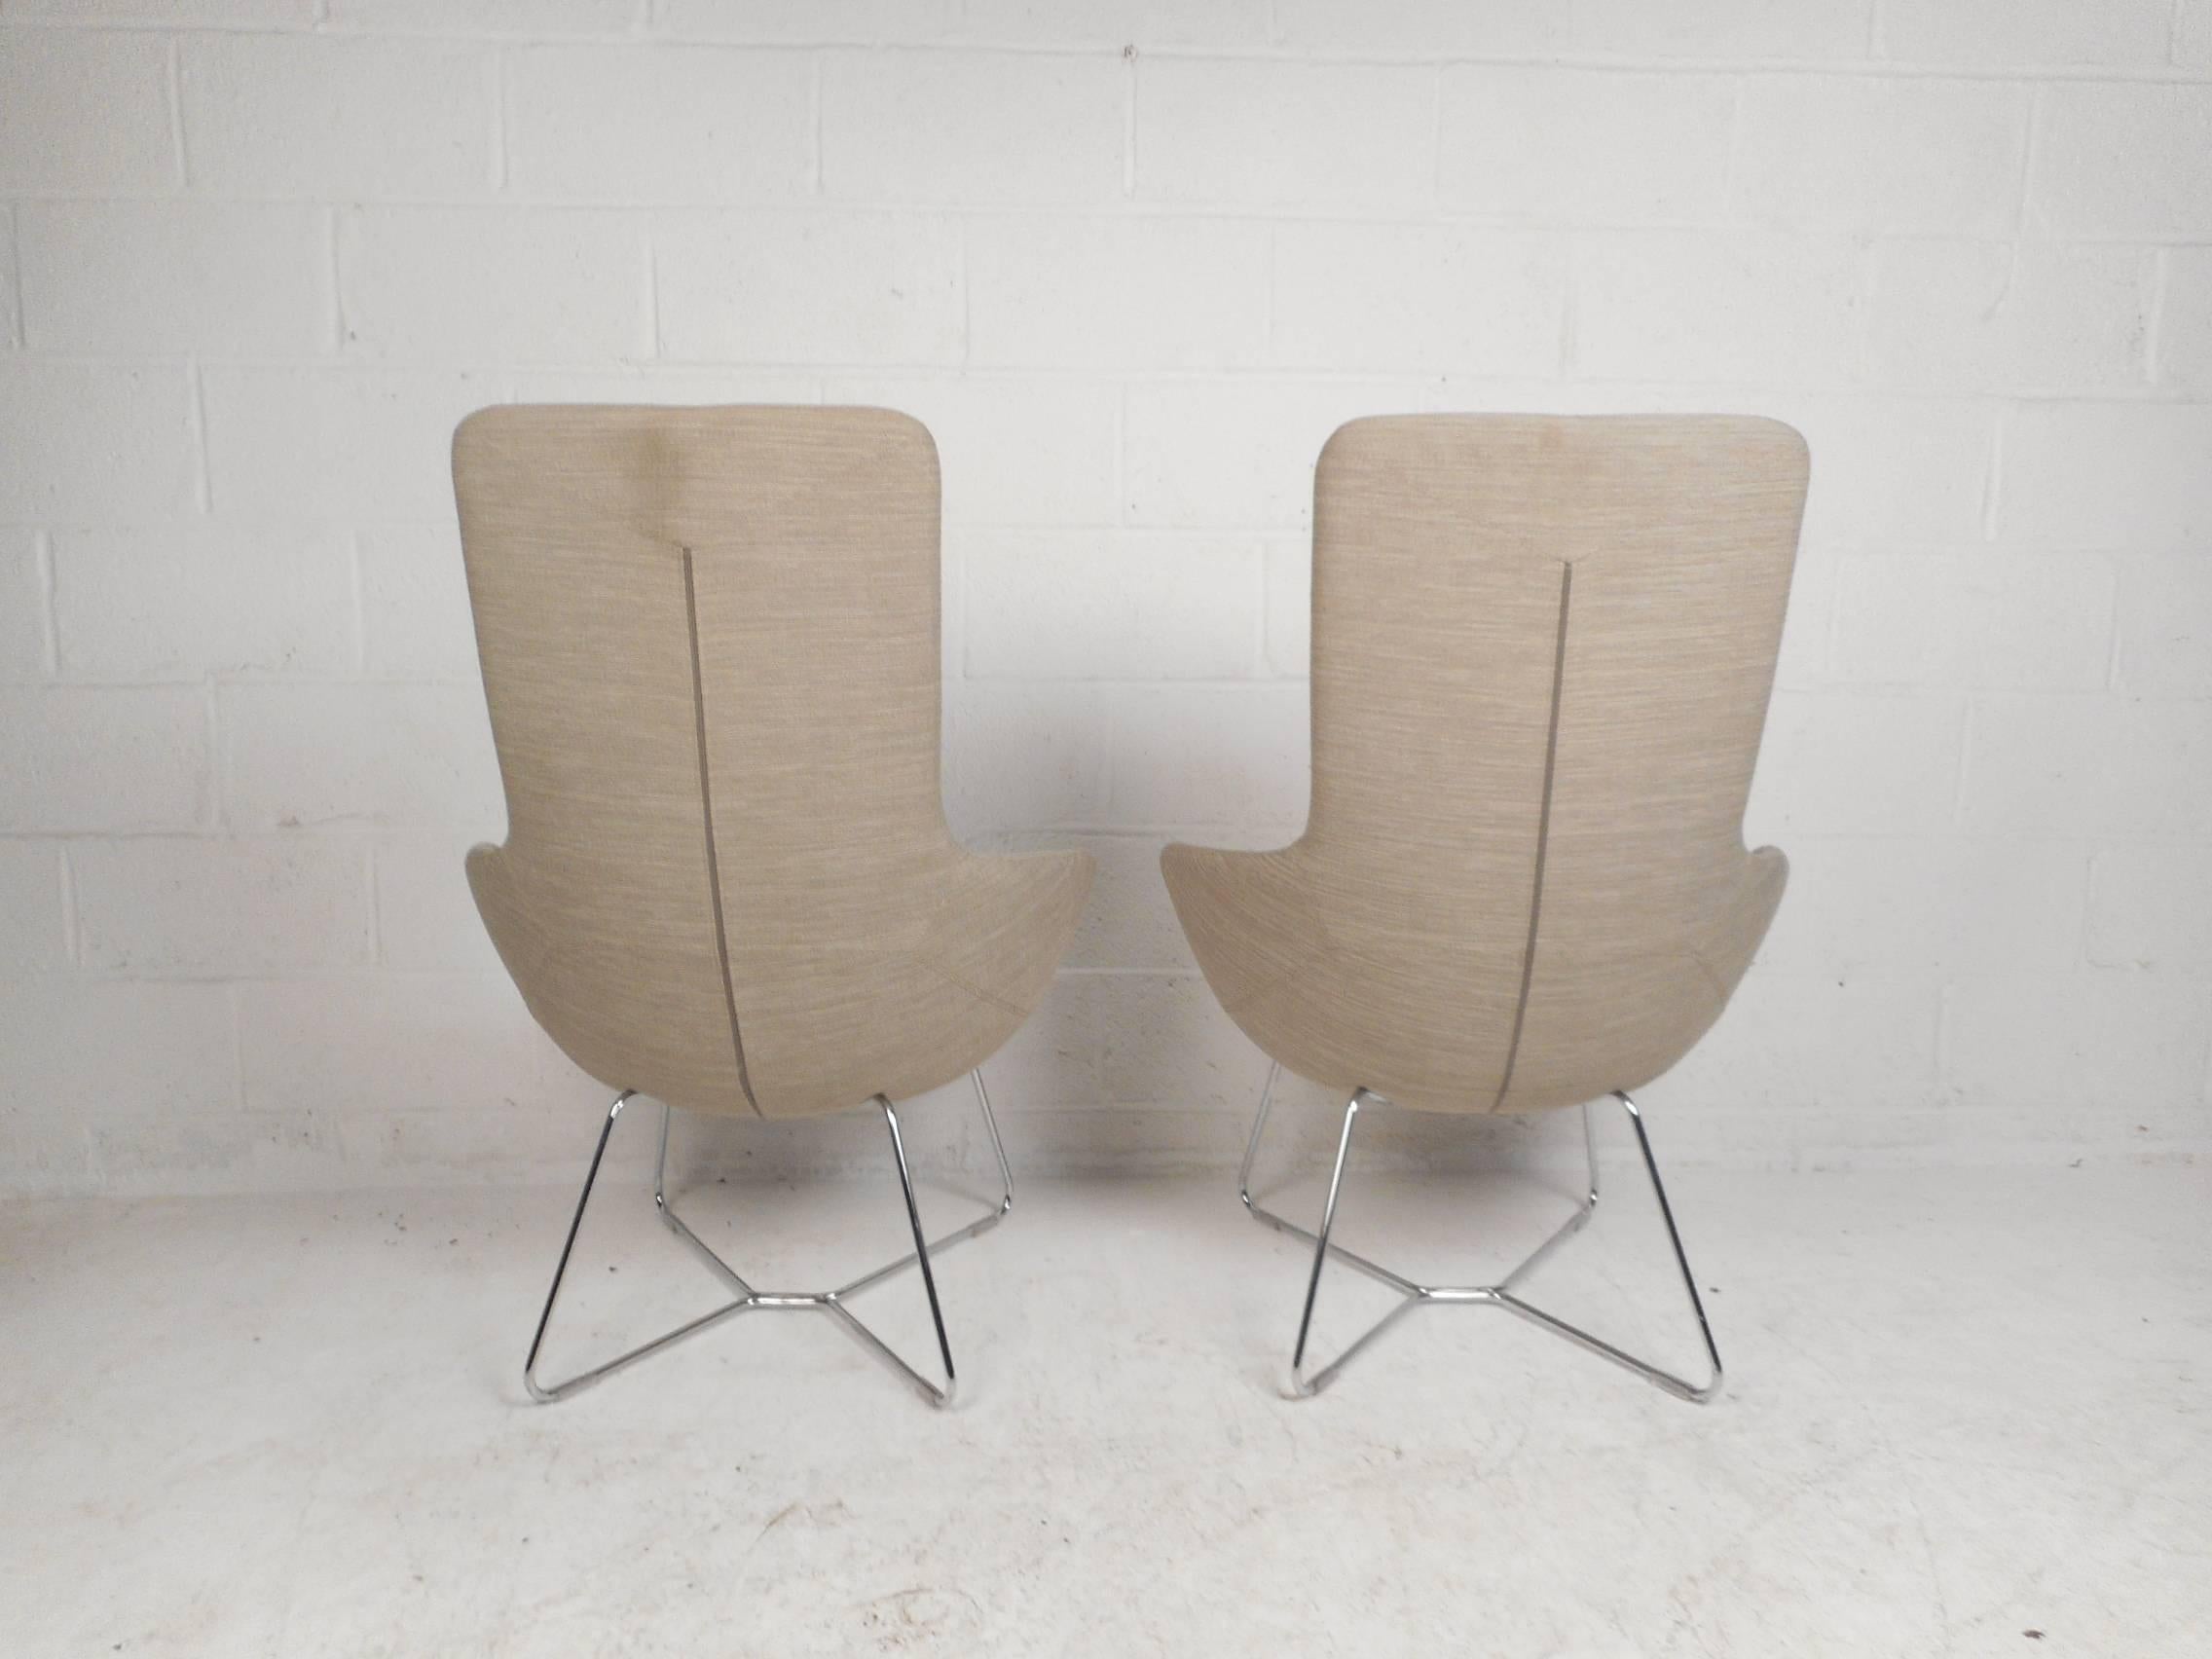 Pair of Mid-Century Style High back Lounge Chairs In Good Condition For Sale In Brooklyn, NY